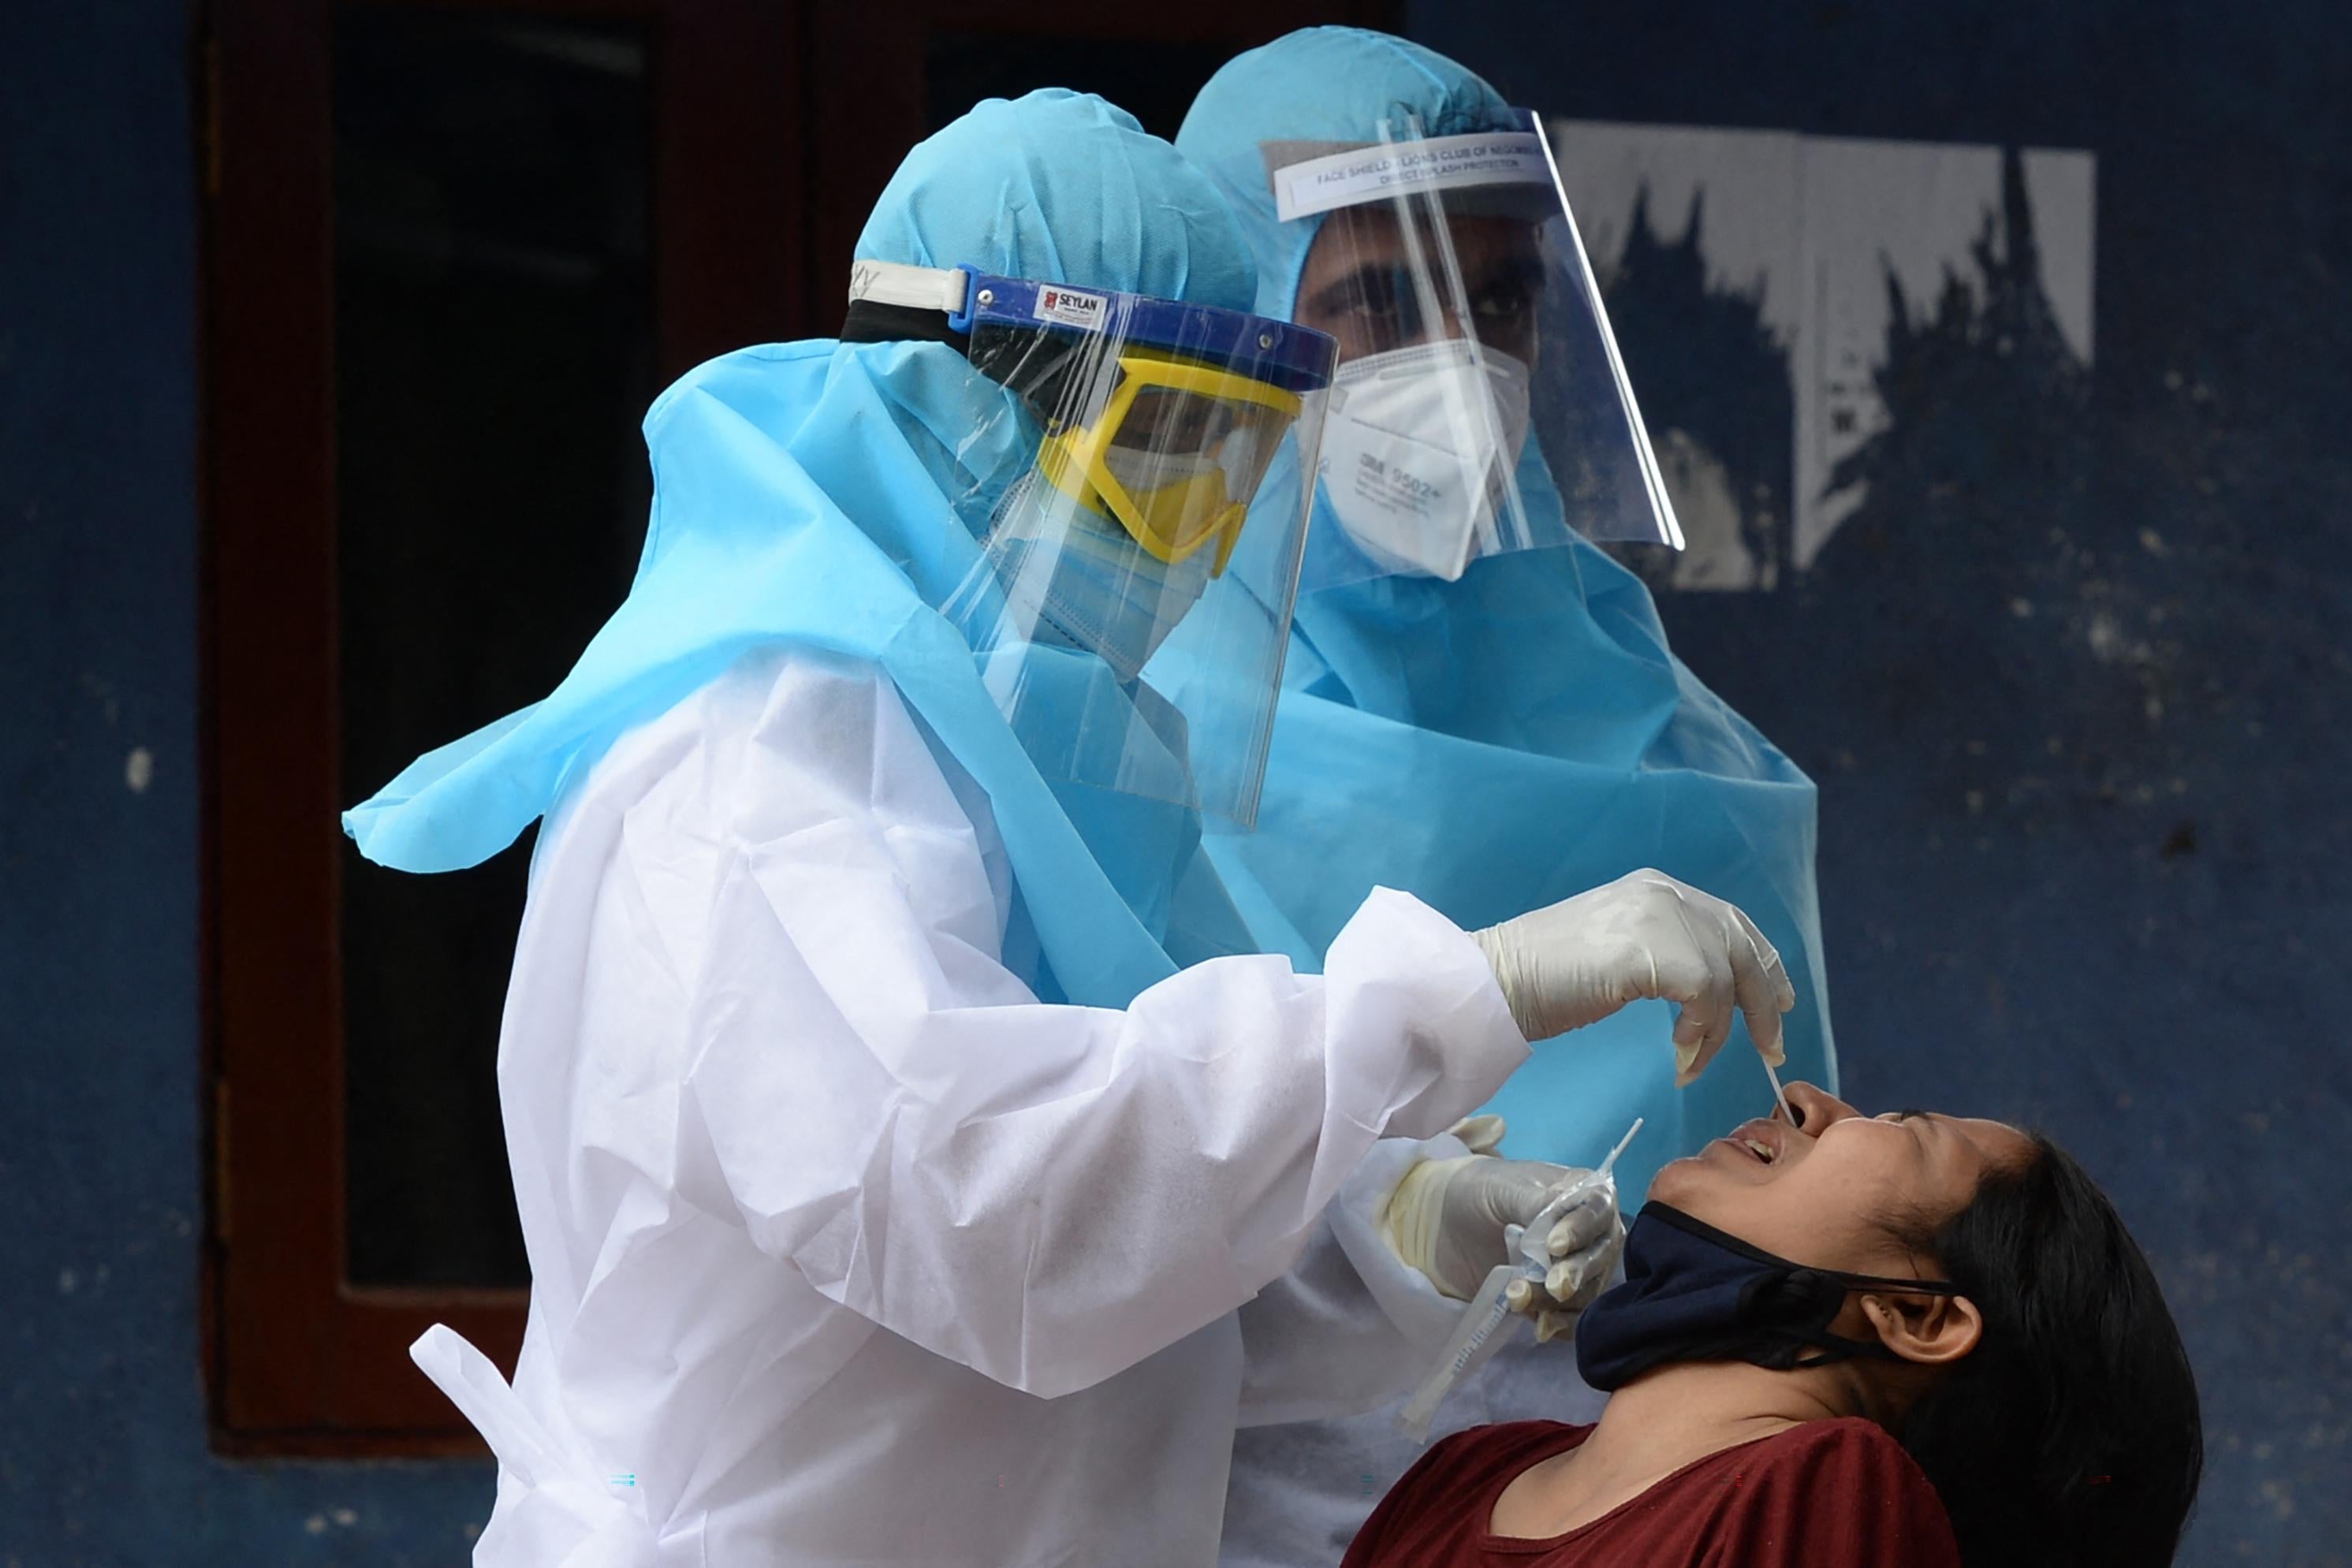 A medical worker wearing protective gear collects a swab sample from a woman sitting with her head back.